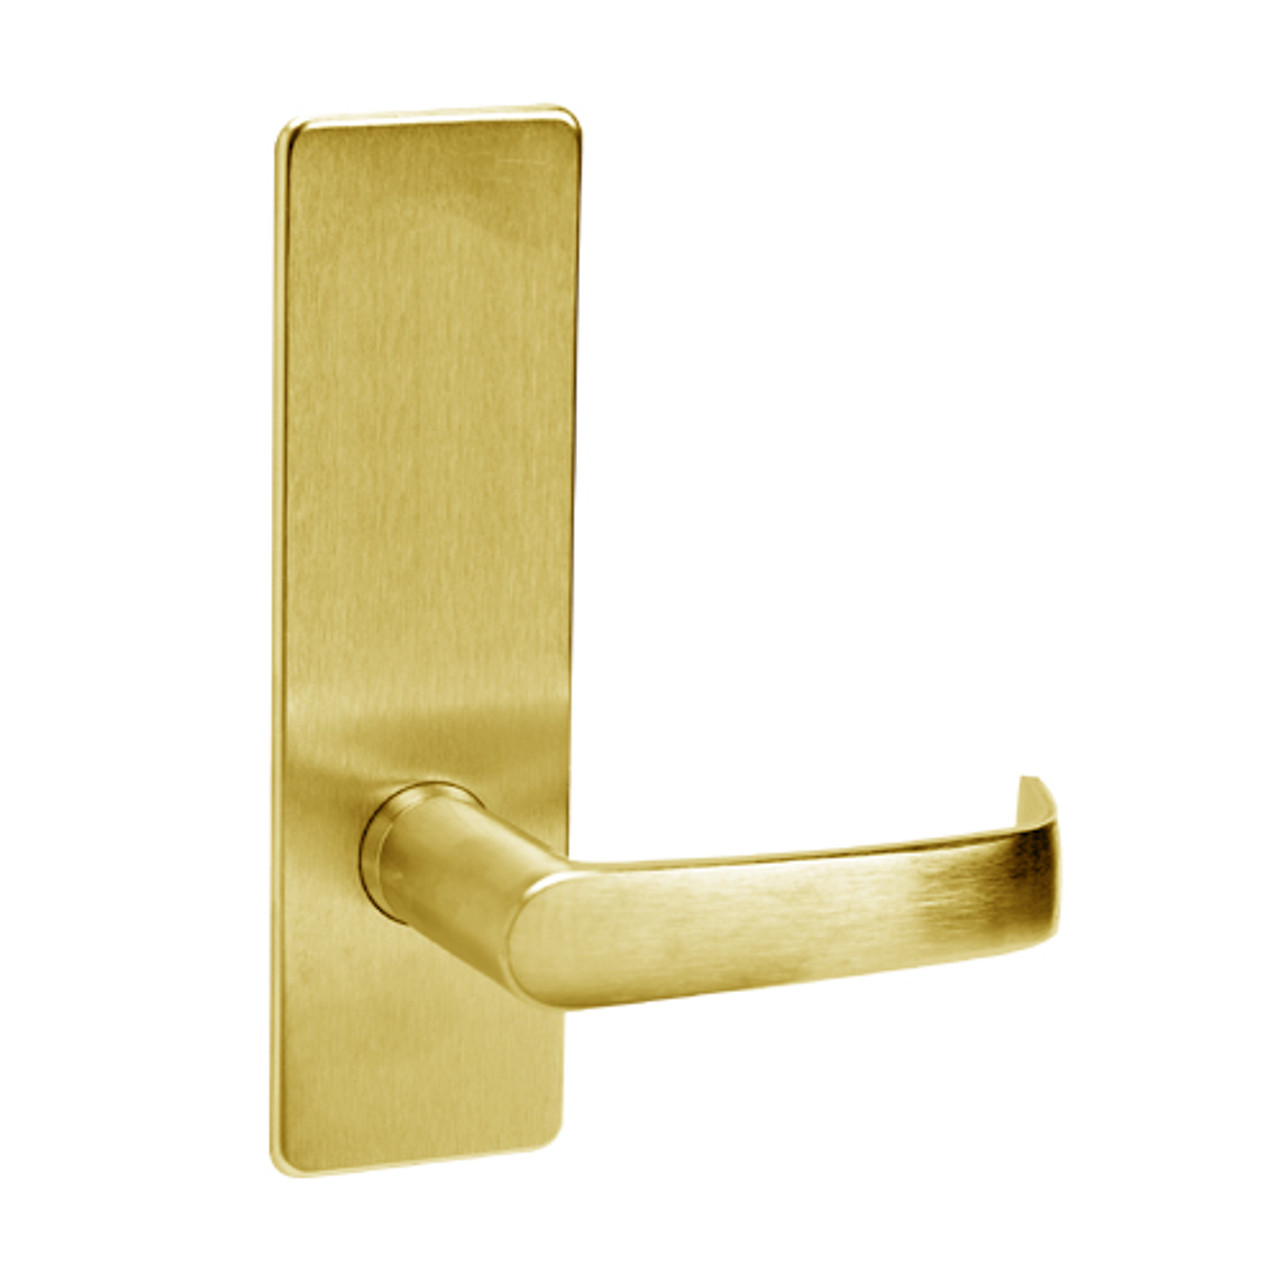 ML2030-NSP-605 Corbin Russwin ML2000 Series Mortise Privacy Locksets with Newport Lever in Bright Brass